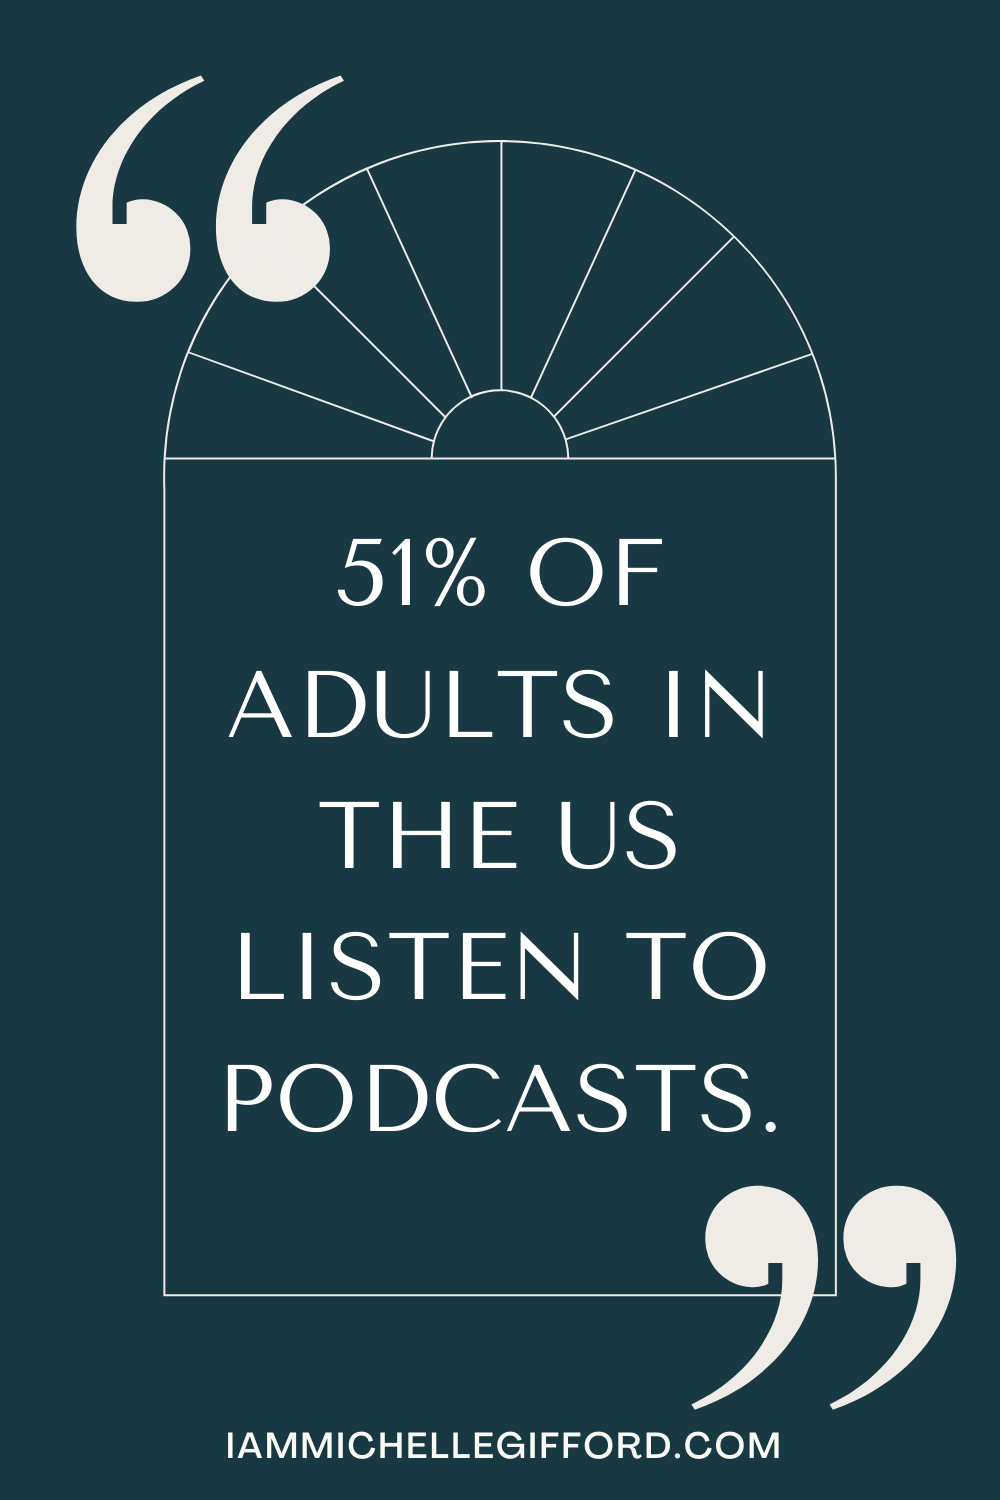 51% of adults in the us listen to podcasts iammichellegifford.com.